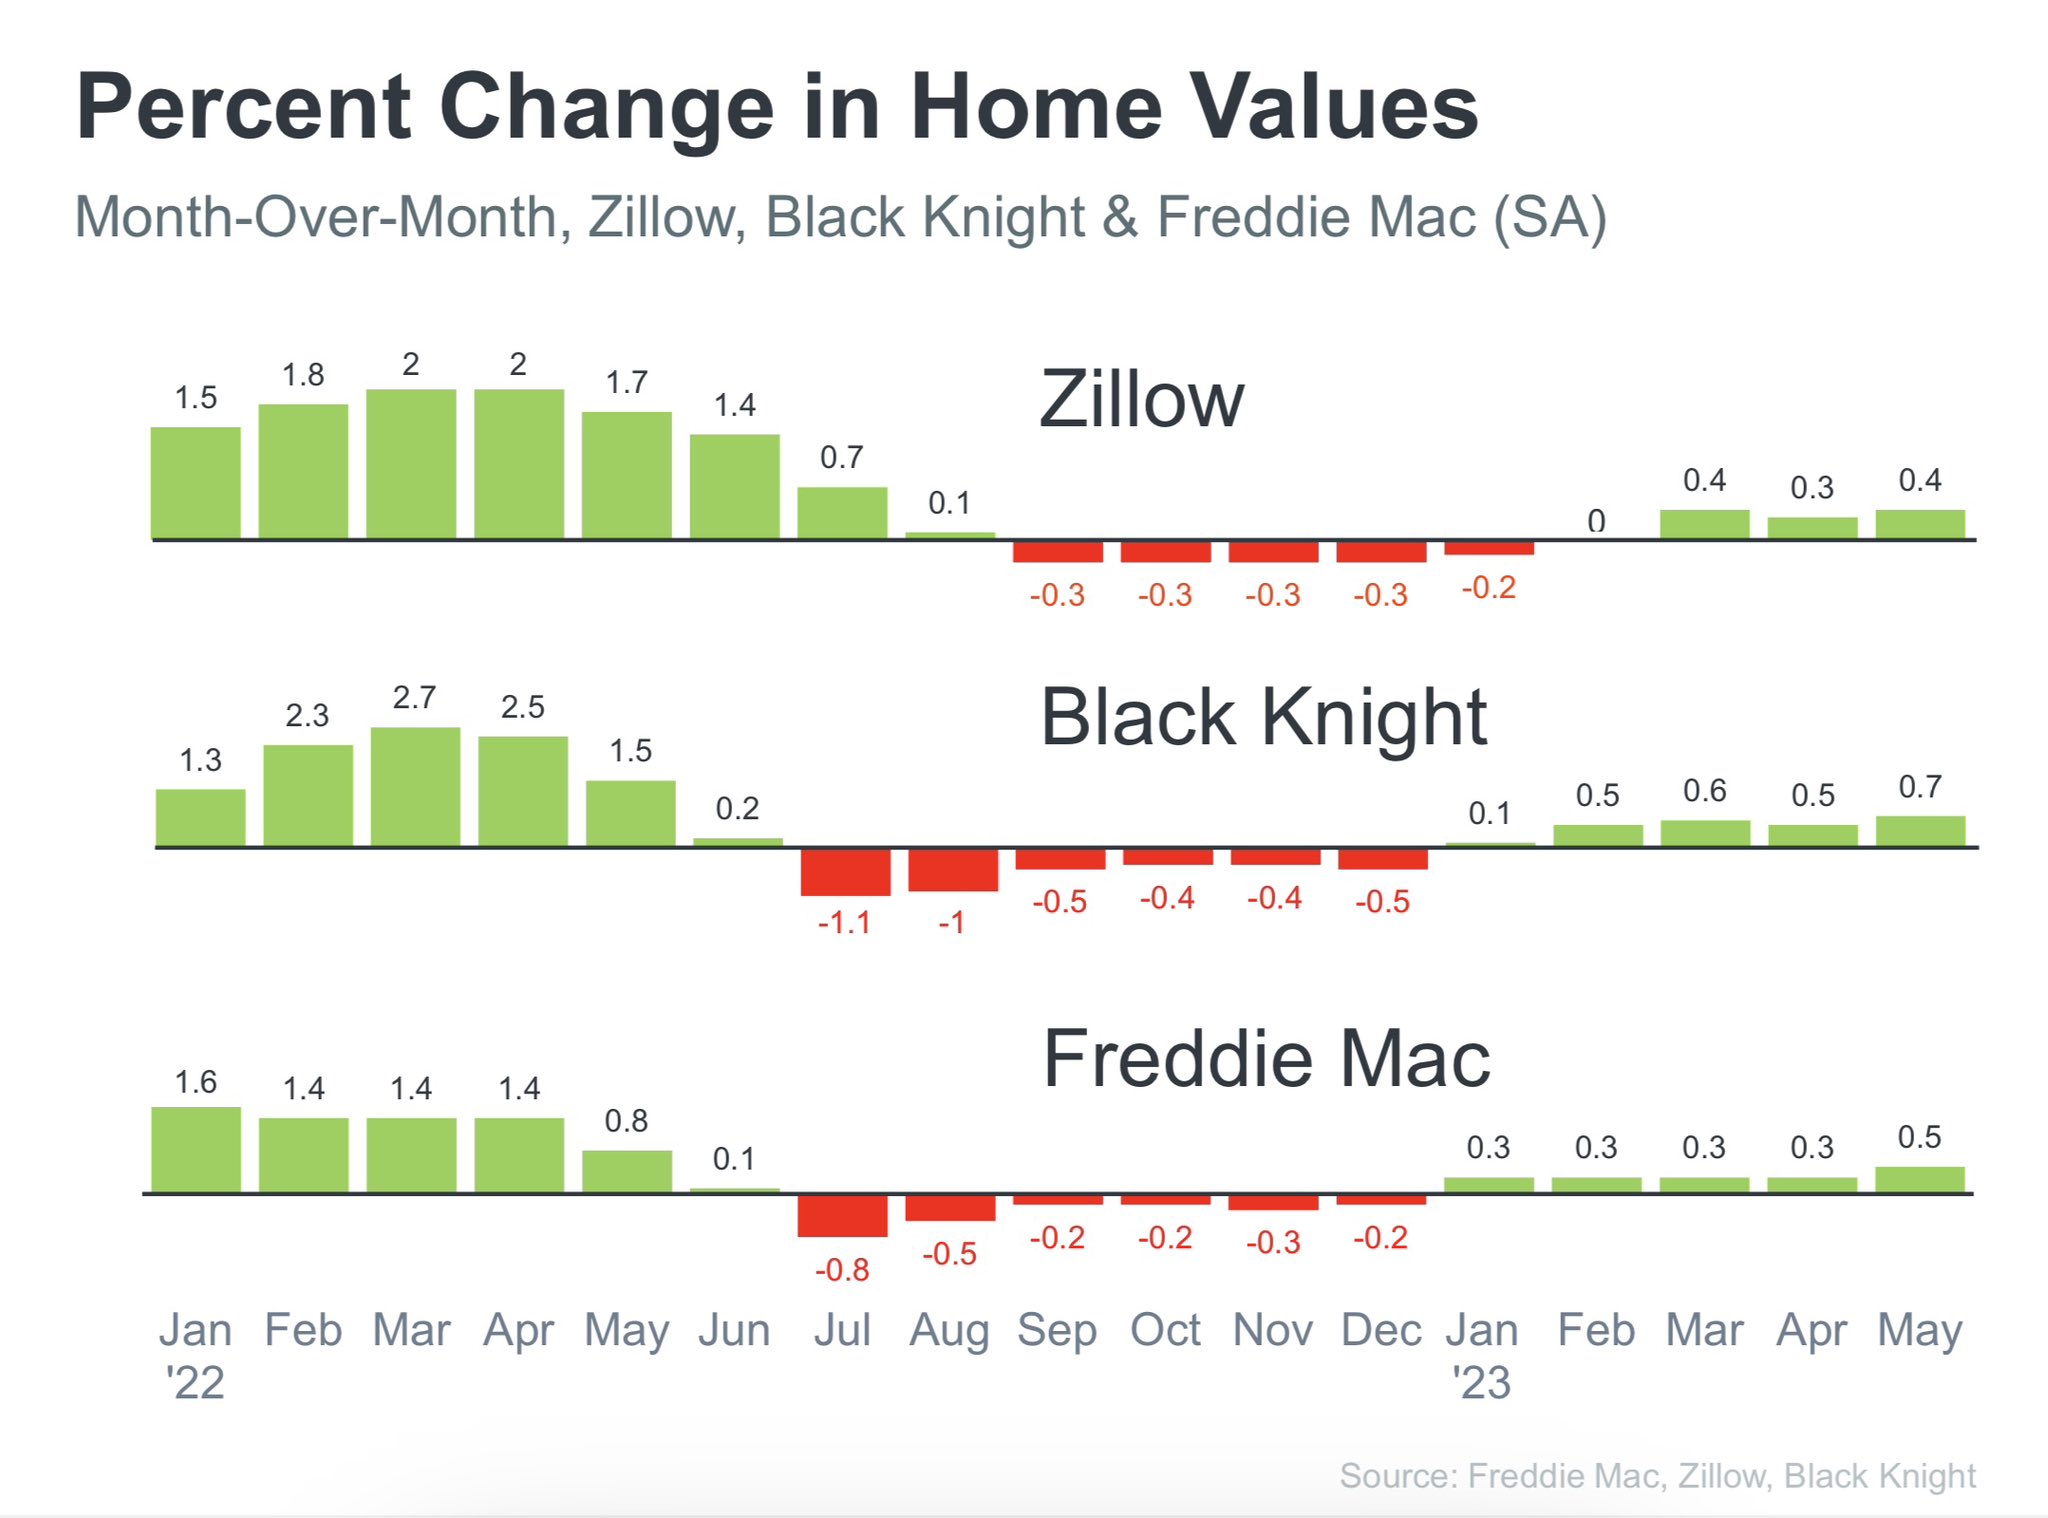 percent change in home values Zillow, Black Knight, Freddie Mac